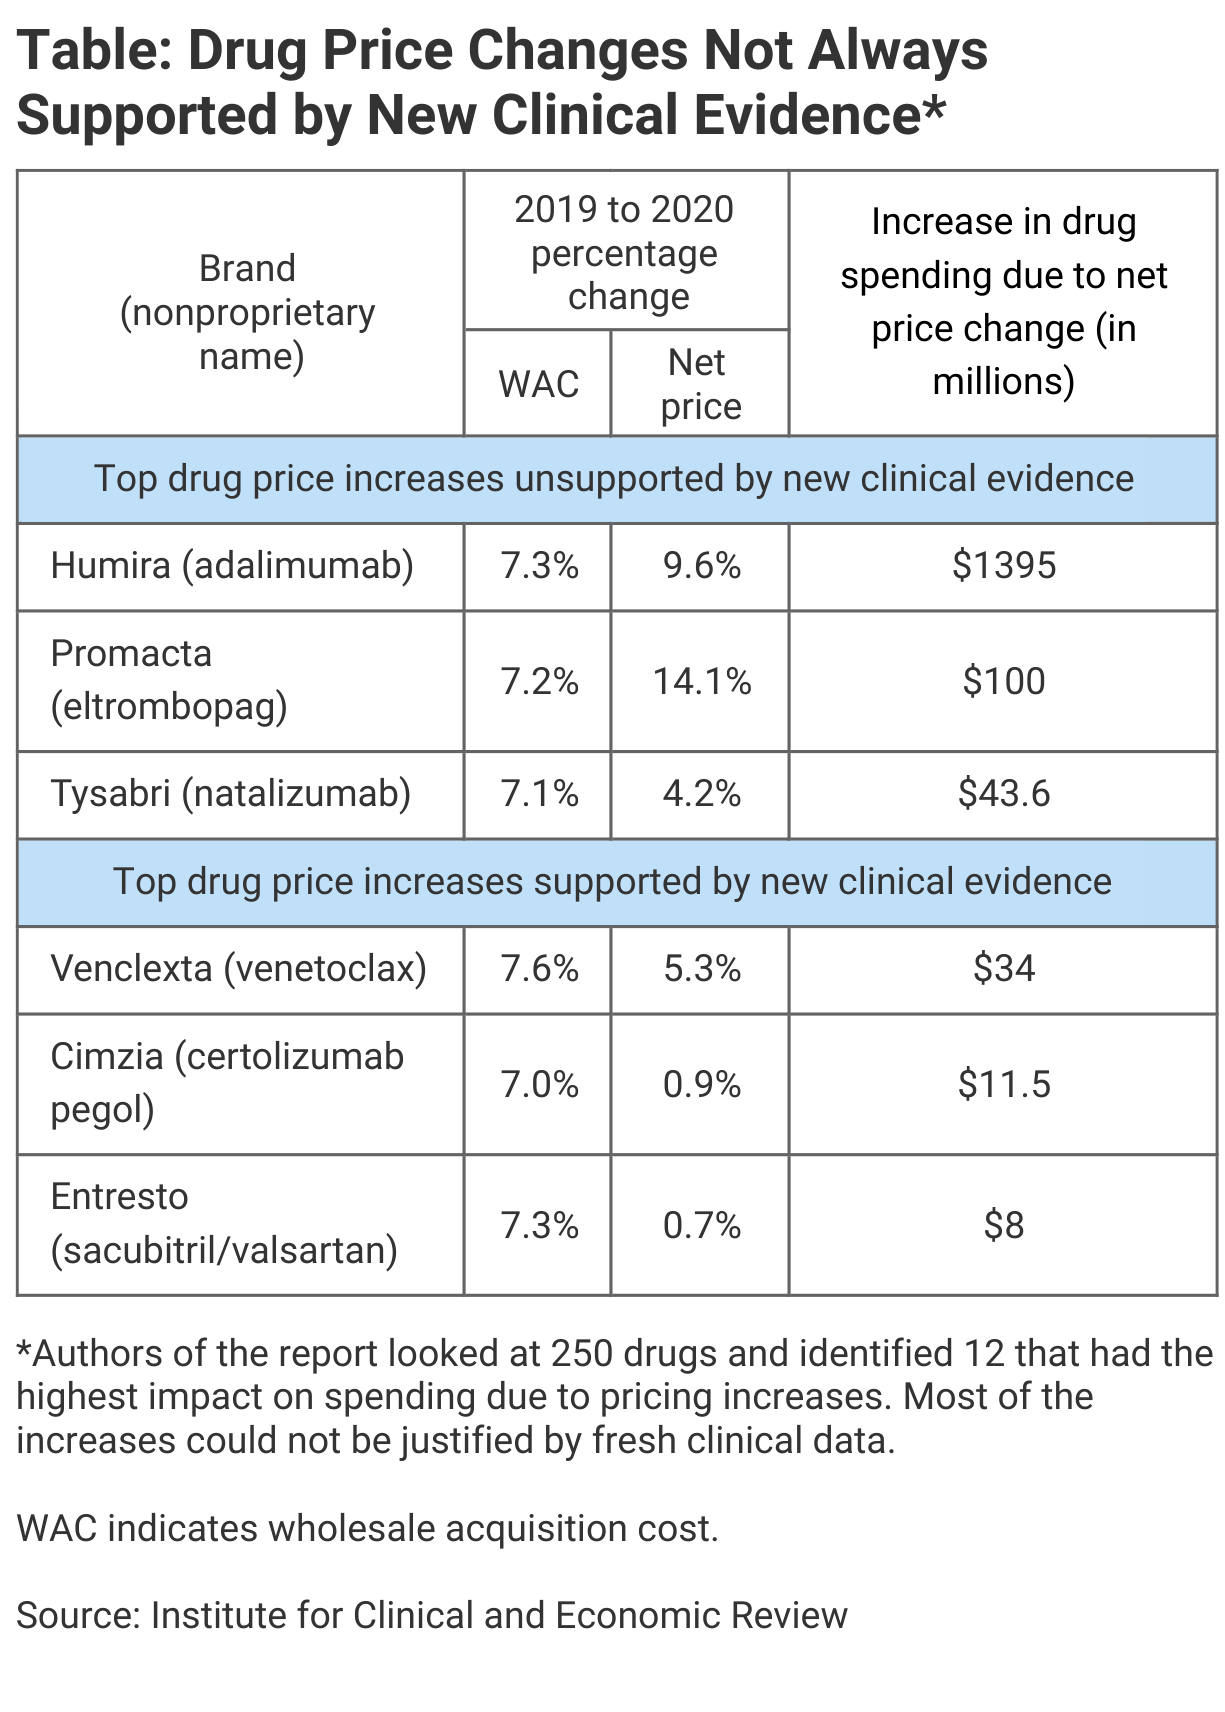 Table showing that Drug Price Changes Are Not Always Supported by New Clinical Evidence 